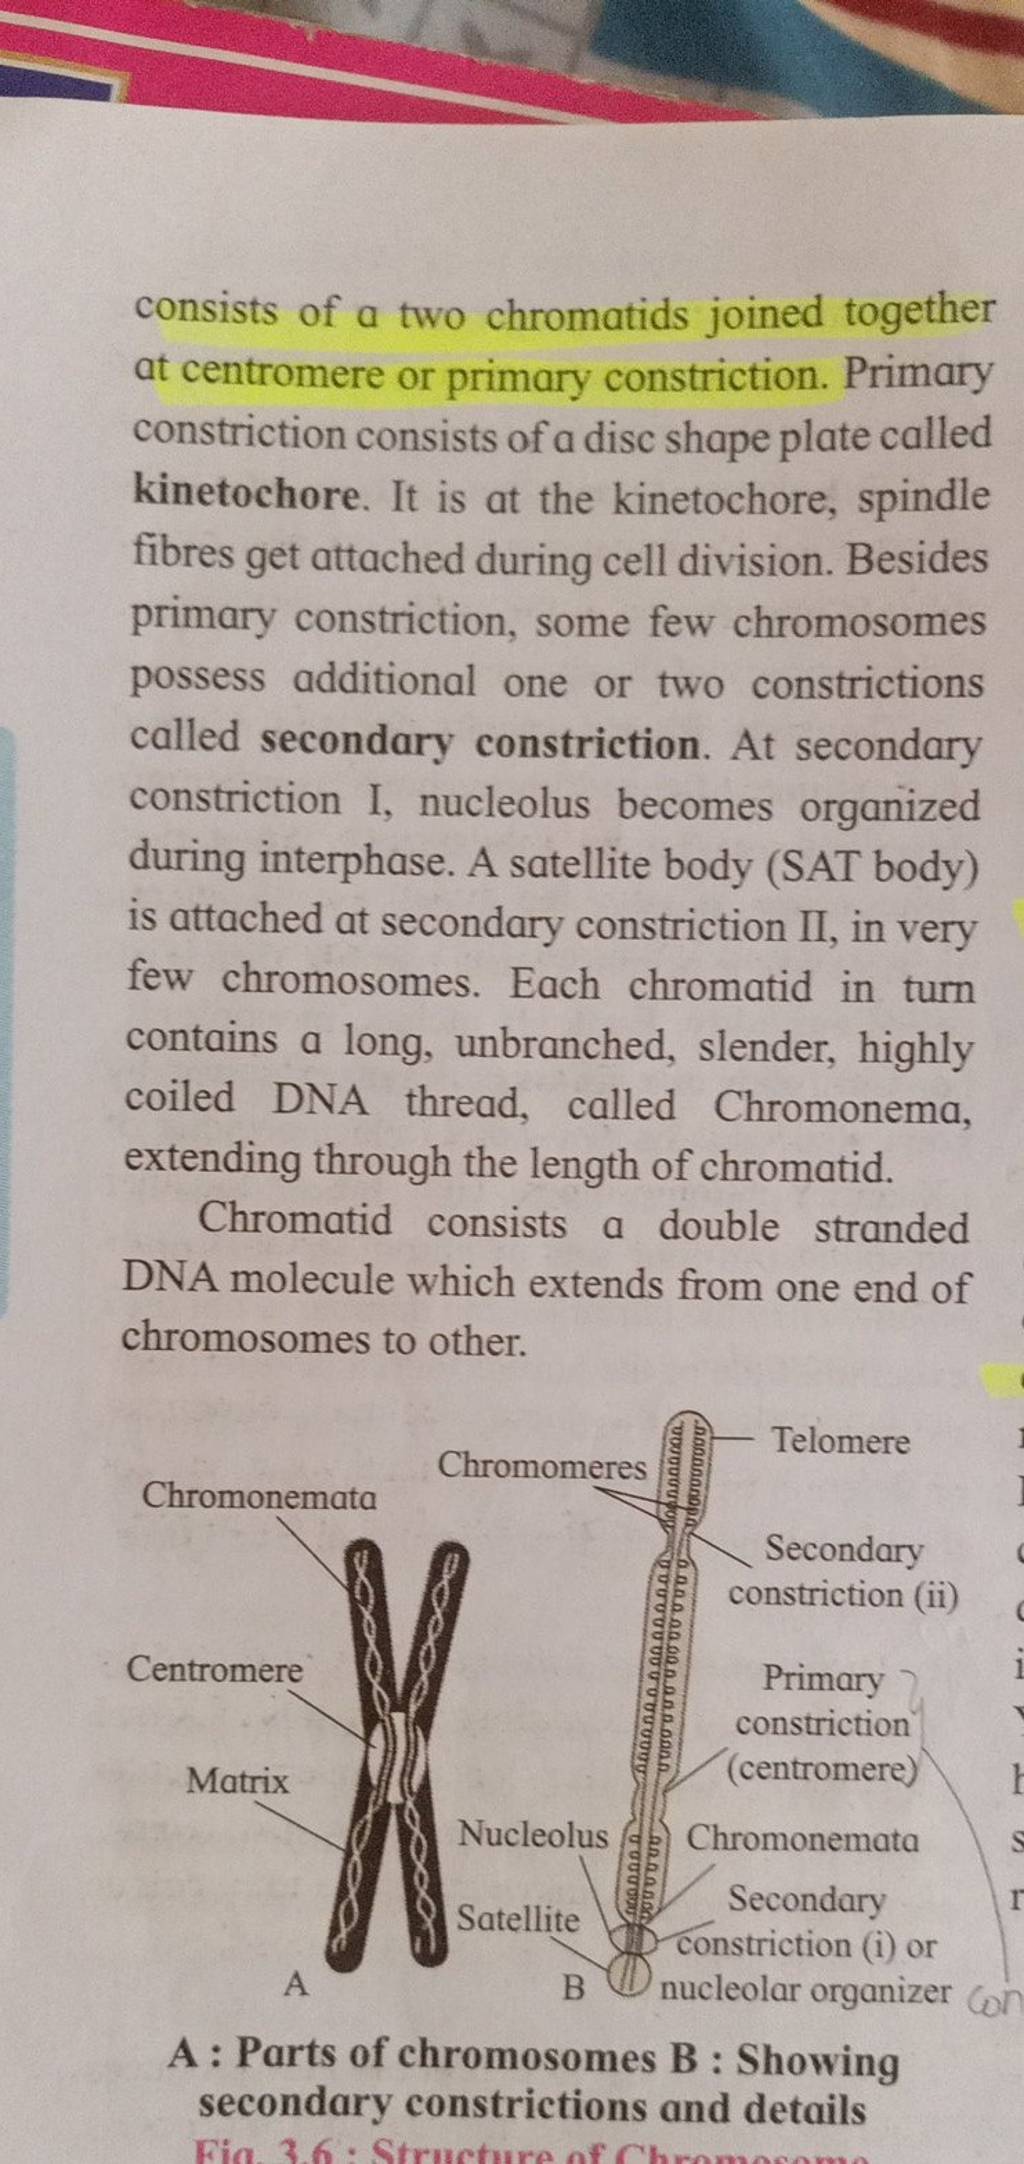 consists of a two chromatids joined together at centromere or primary 